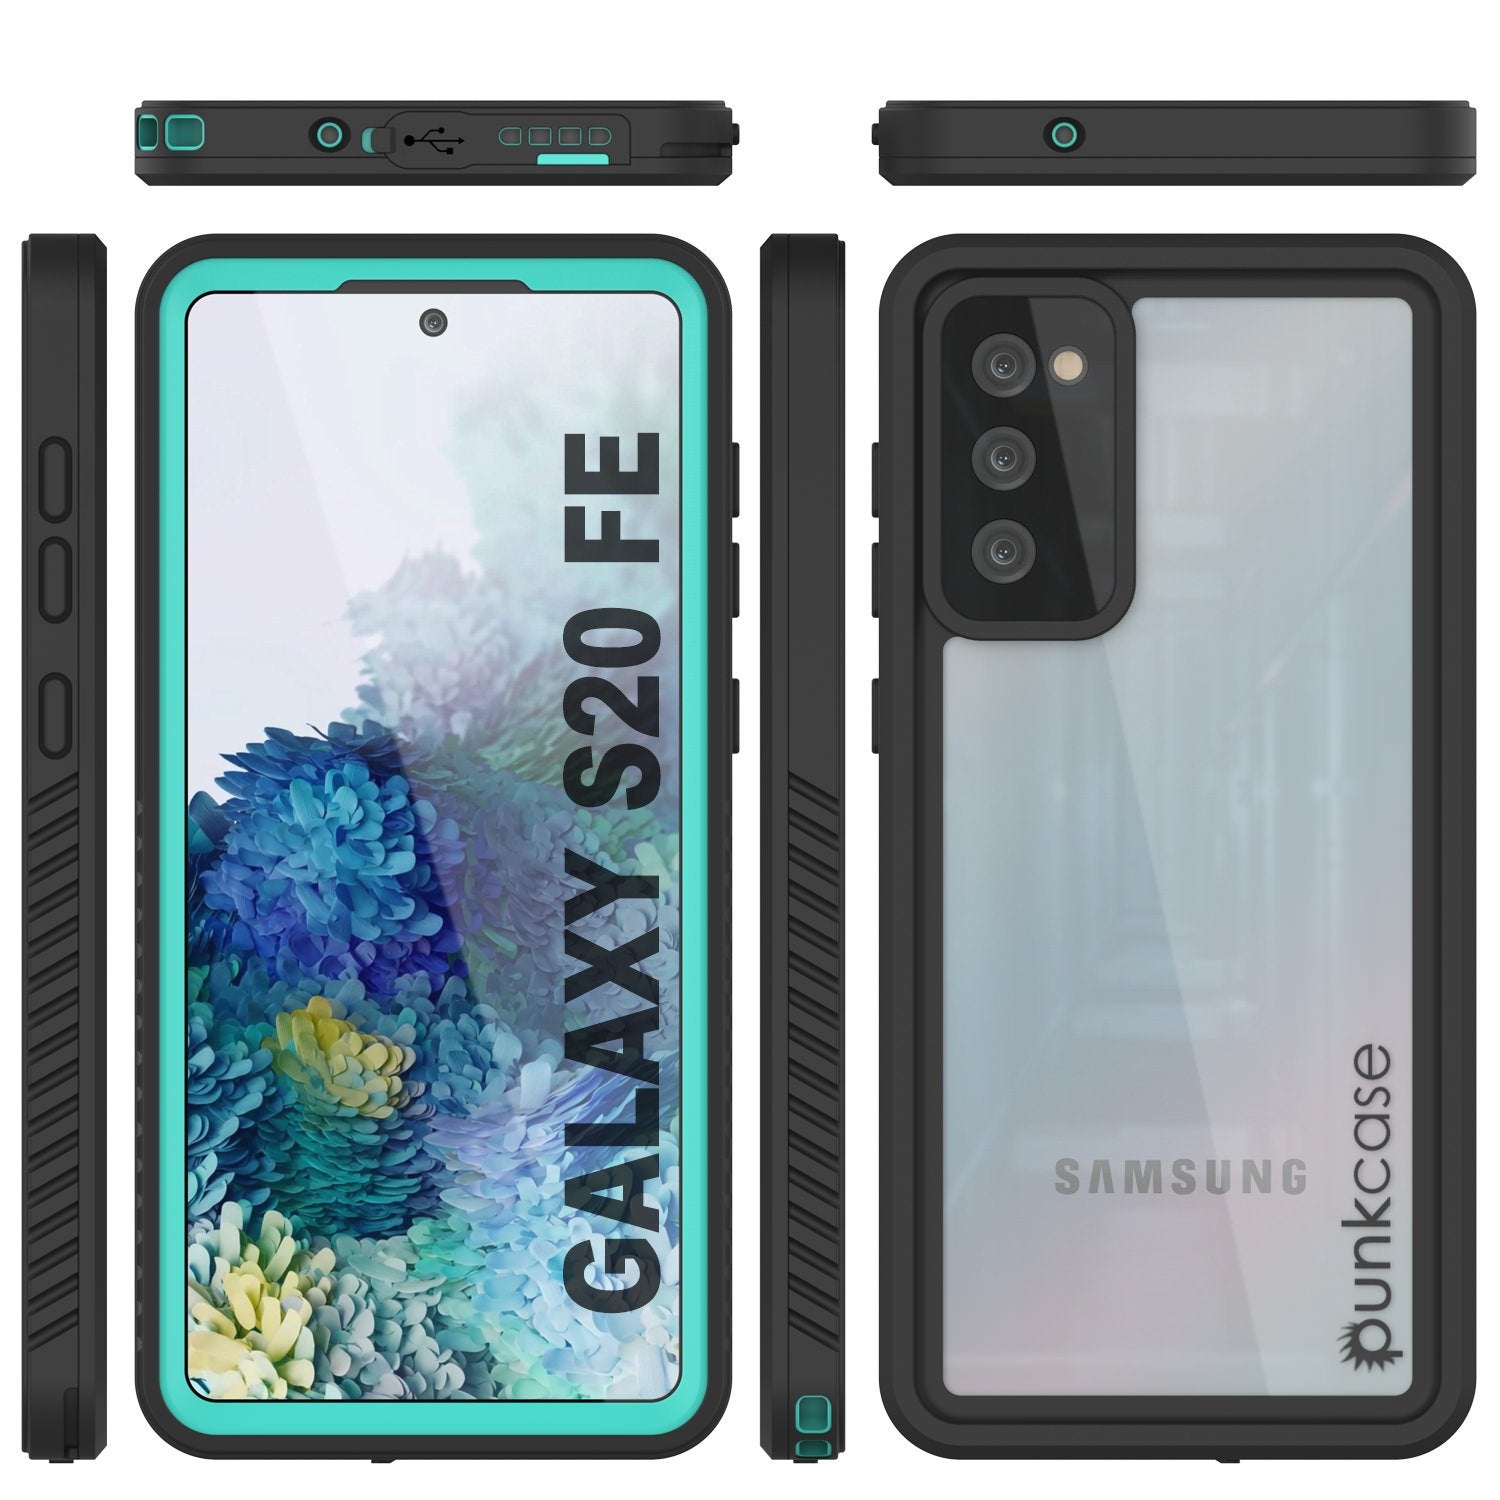 Galaxy S20 FE Water/Shock/Snowproof [Extreme Series]  Screen Protector Case [Teal]